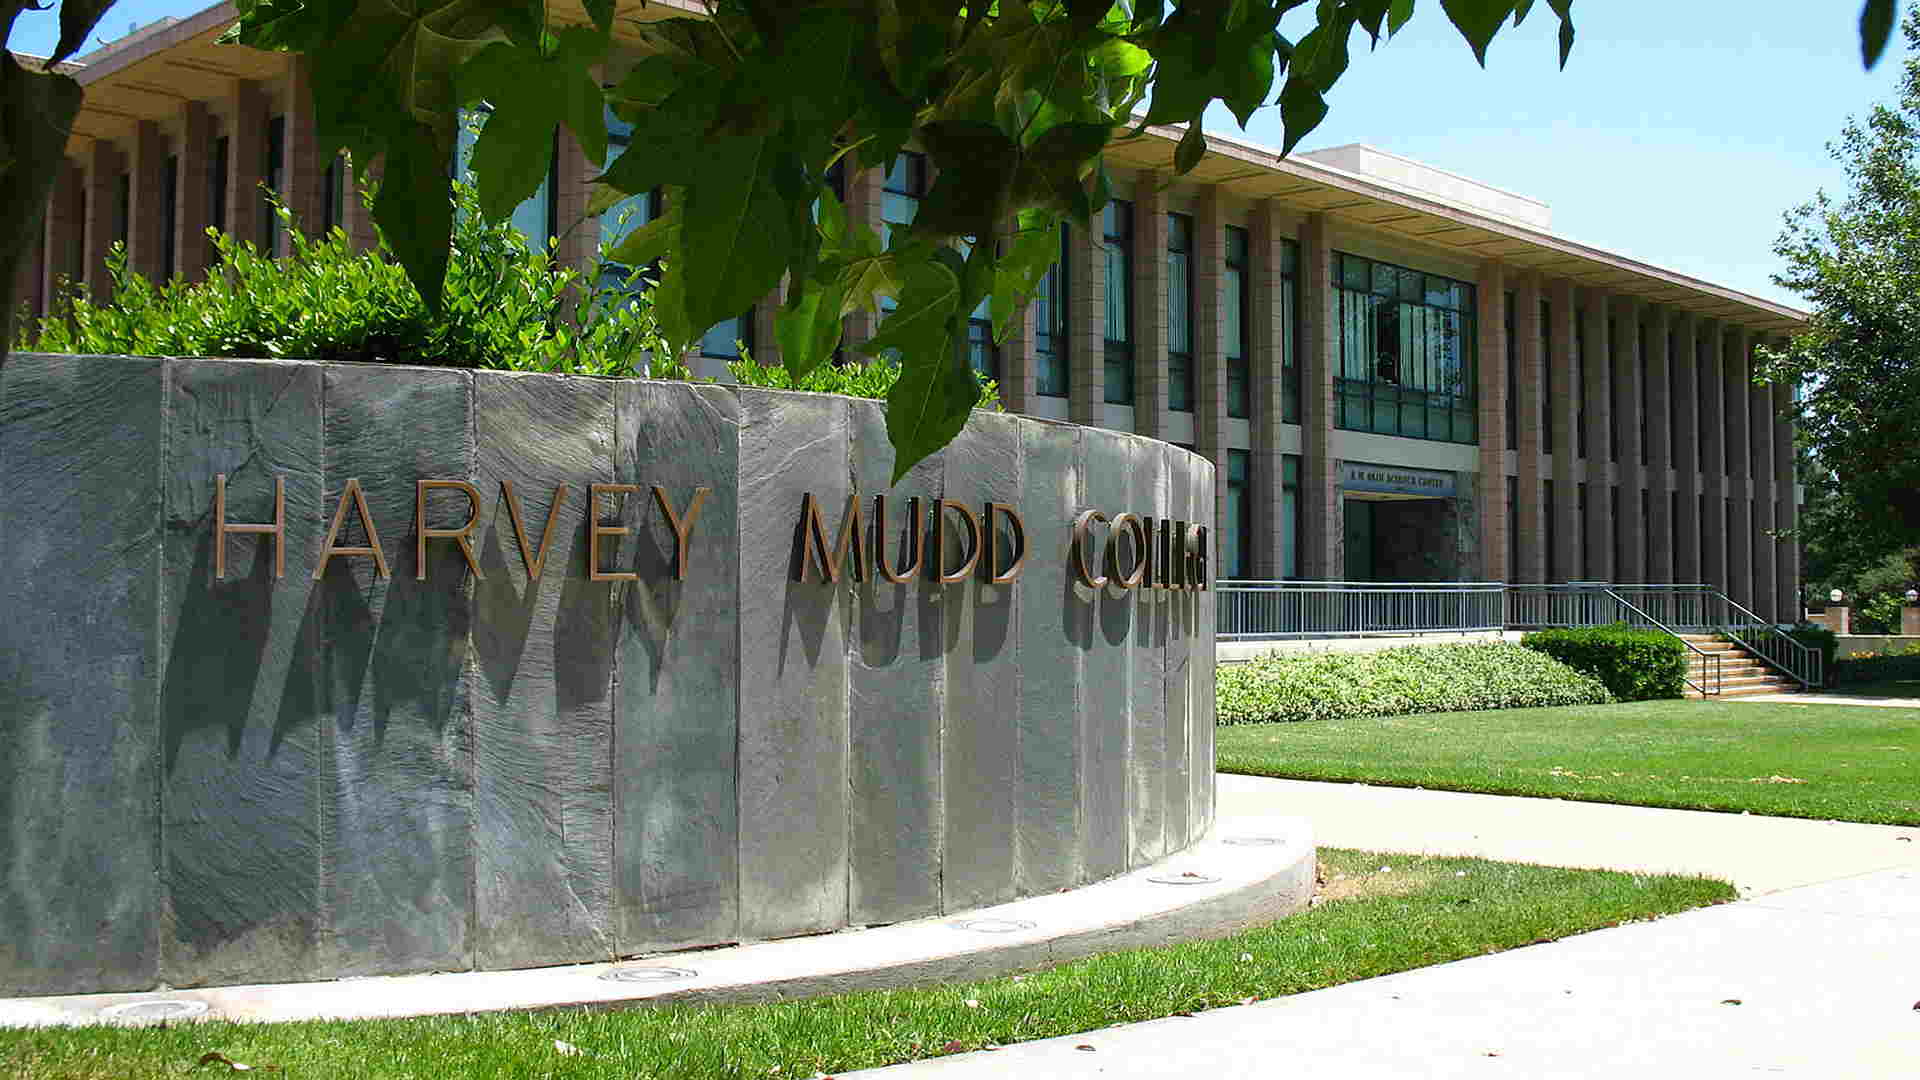 Harvey Mudd College, Dartmouth Avenue Entrance. Image courtesy of Imagine at English Wikipedia (Transferred from en.wikipedia to Commons.) [<a href="http://creativecommons.org/licenses/by/2.5">CC BY 2.5</a>], via Wikimedia Commons.